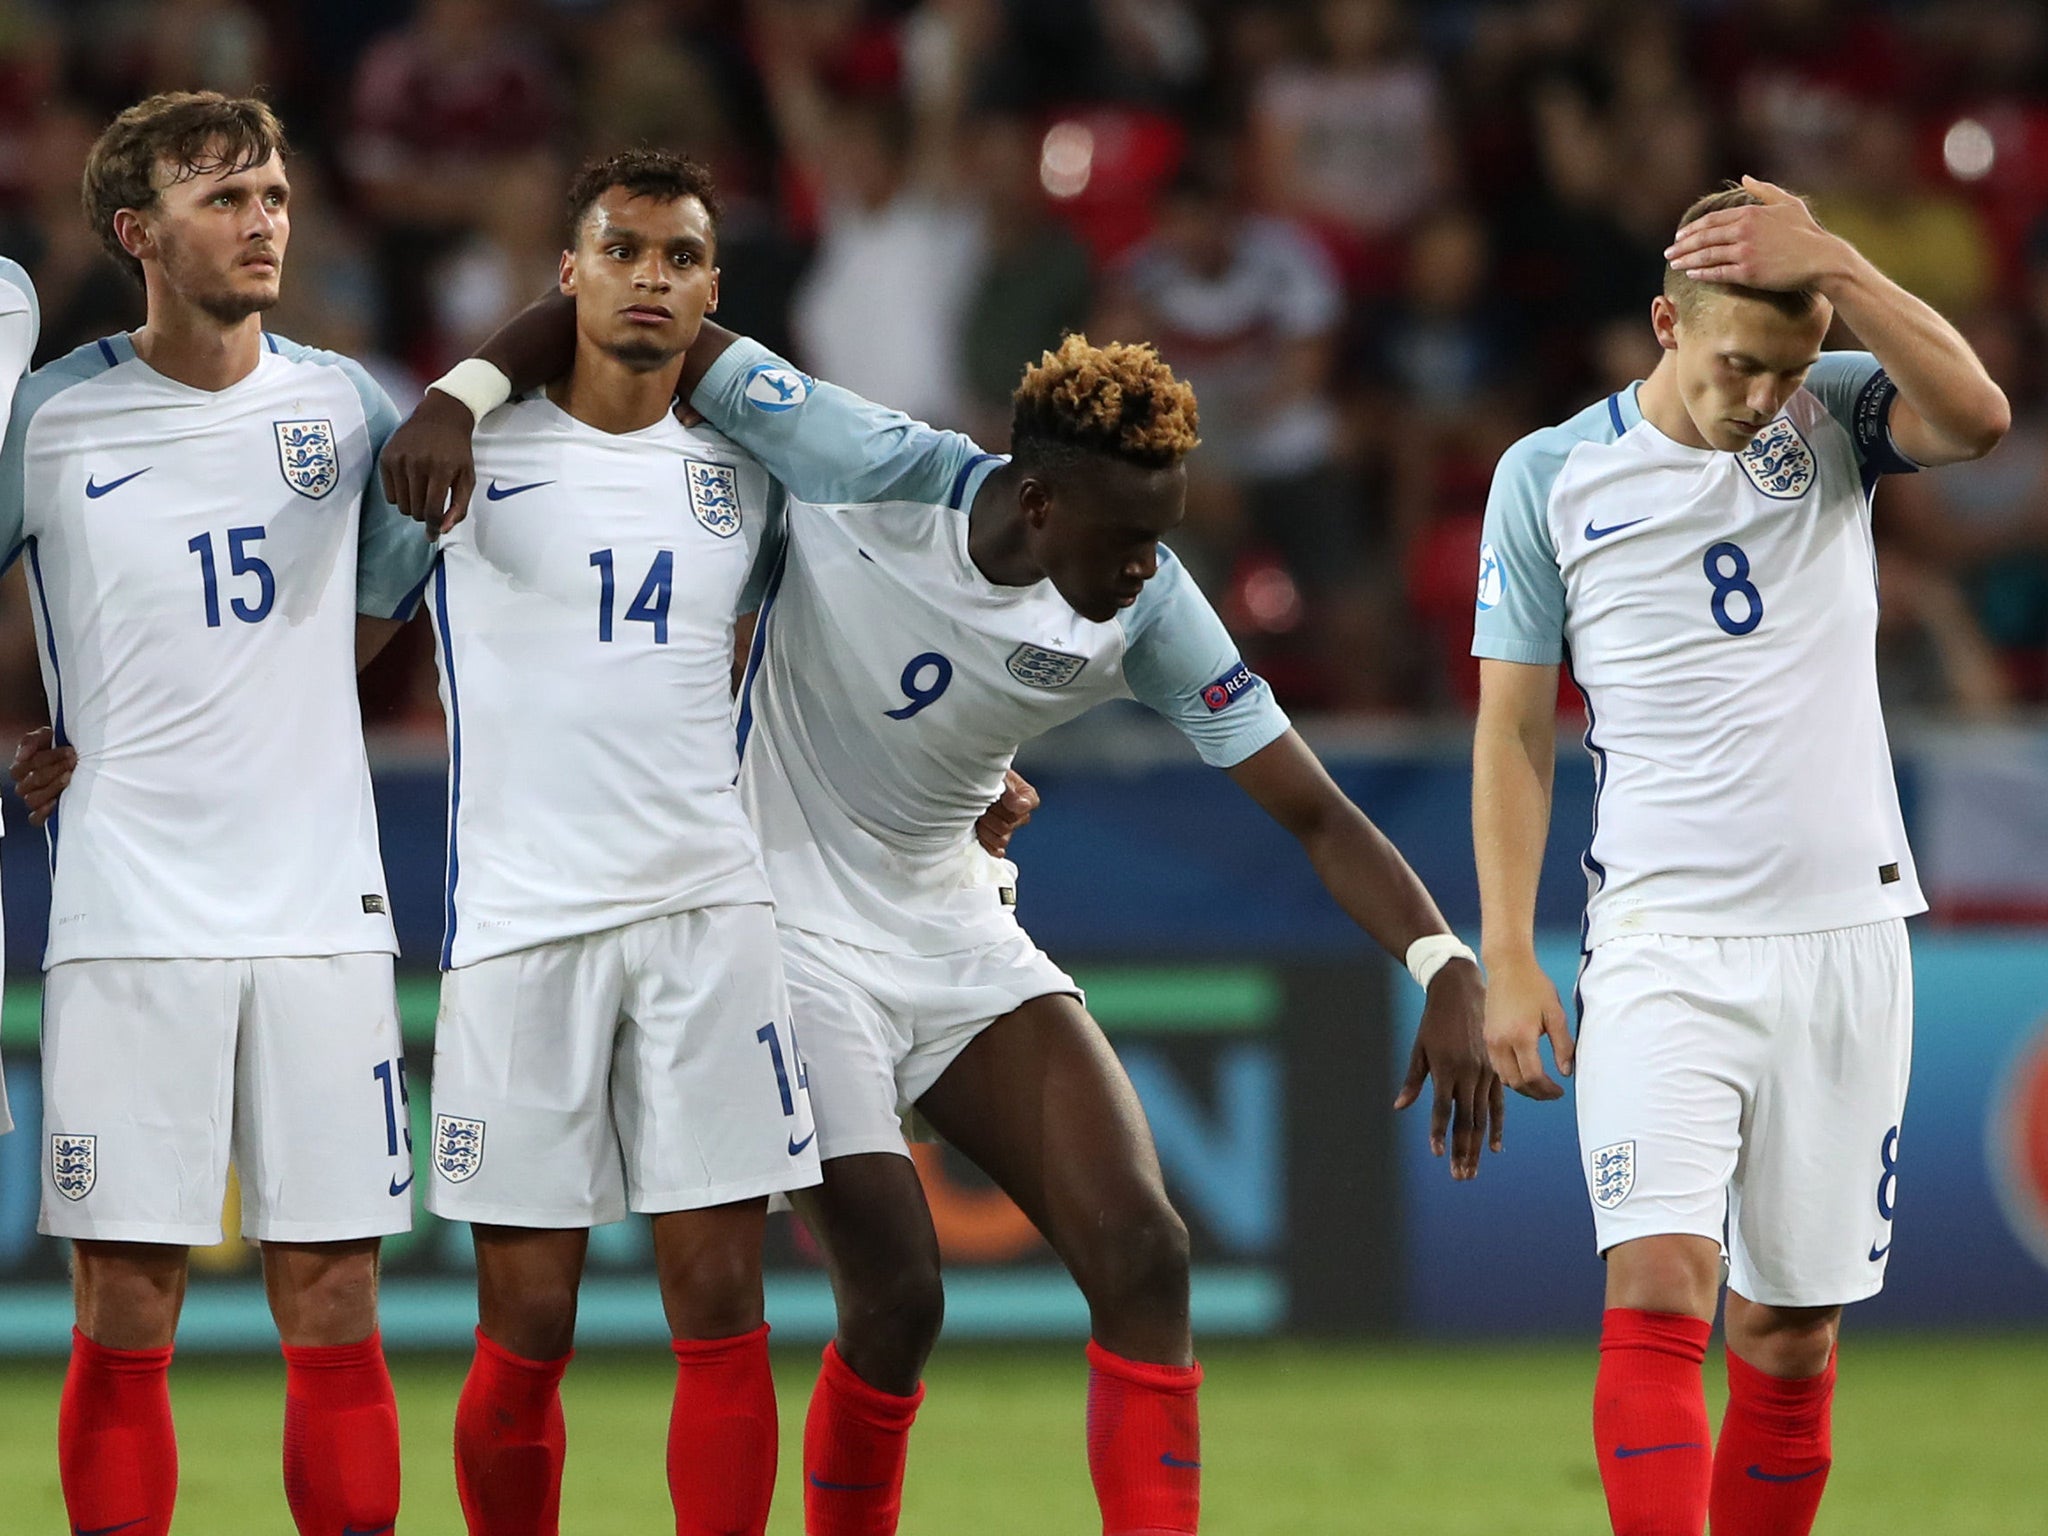 The manner of England's play after going ahead was the night's real disappointment